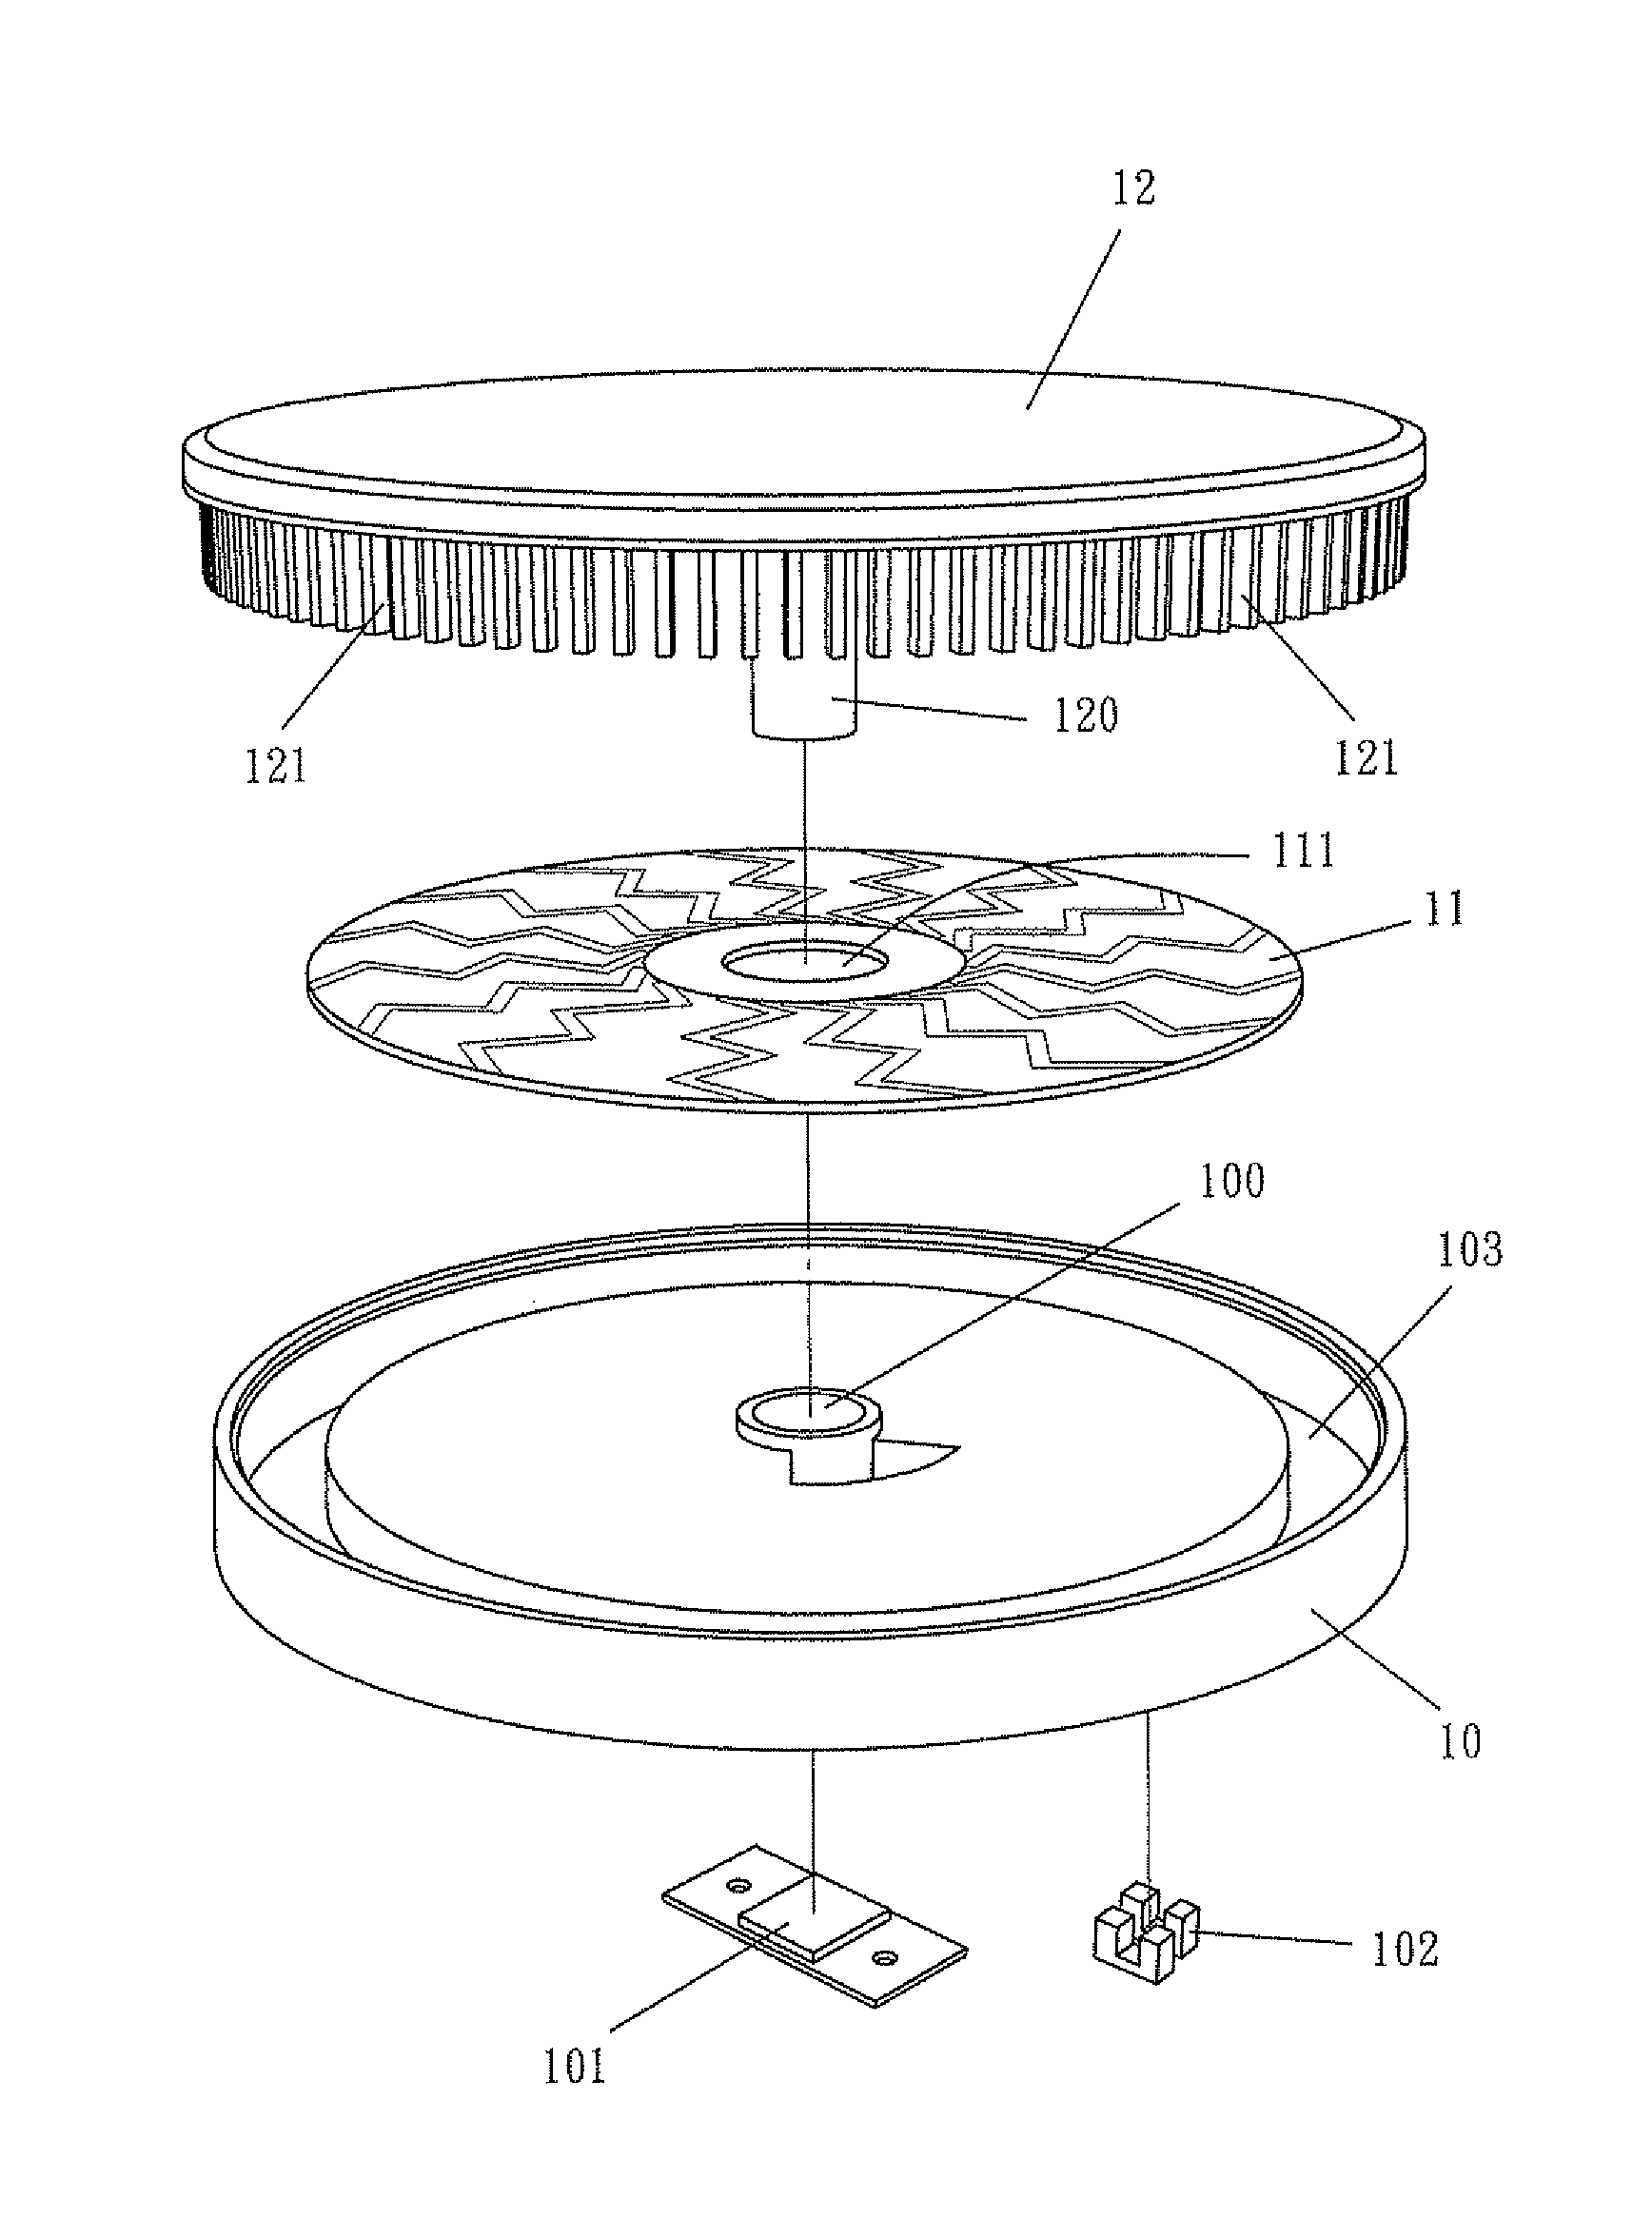 Turntable having multiple-point touch function for a digital sound-signal device